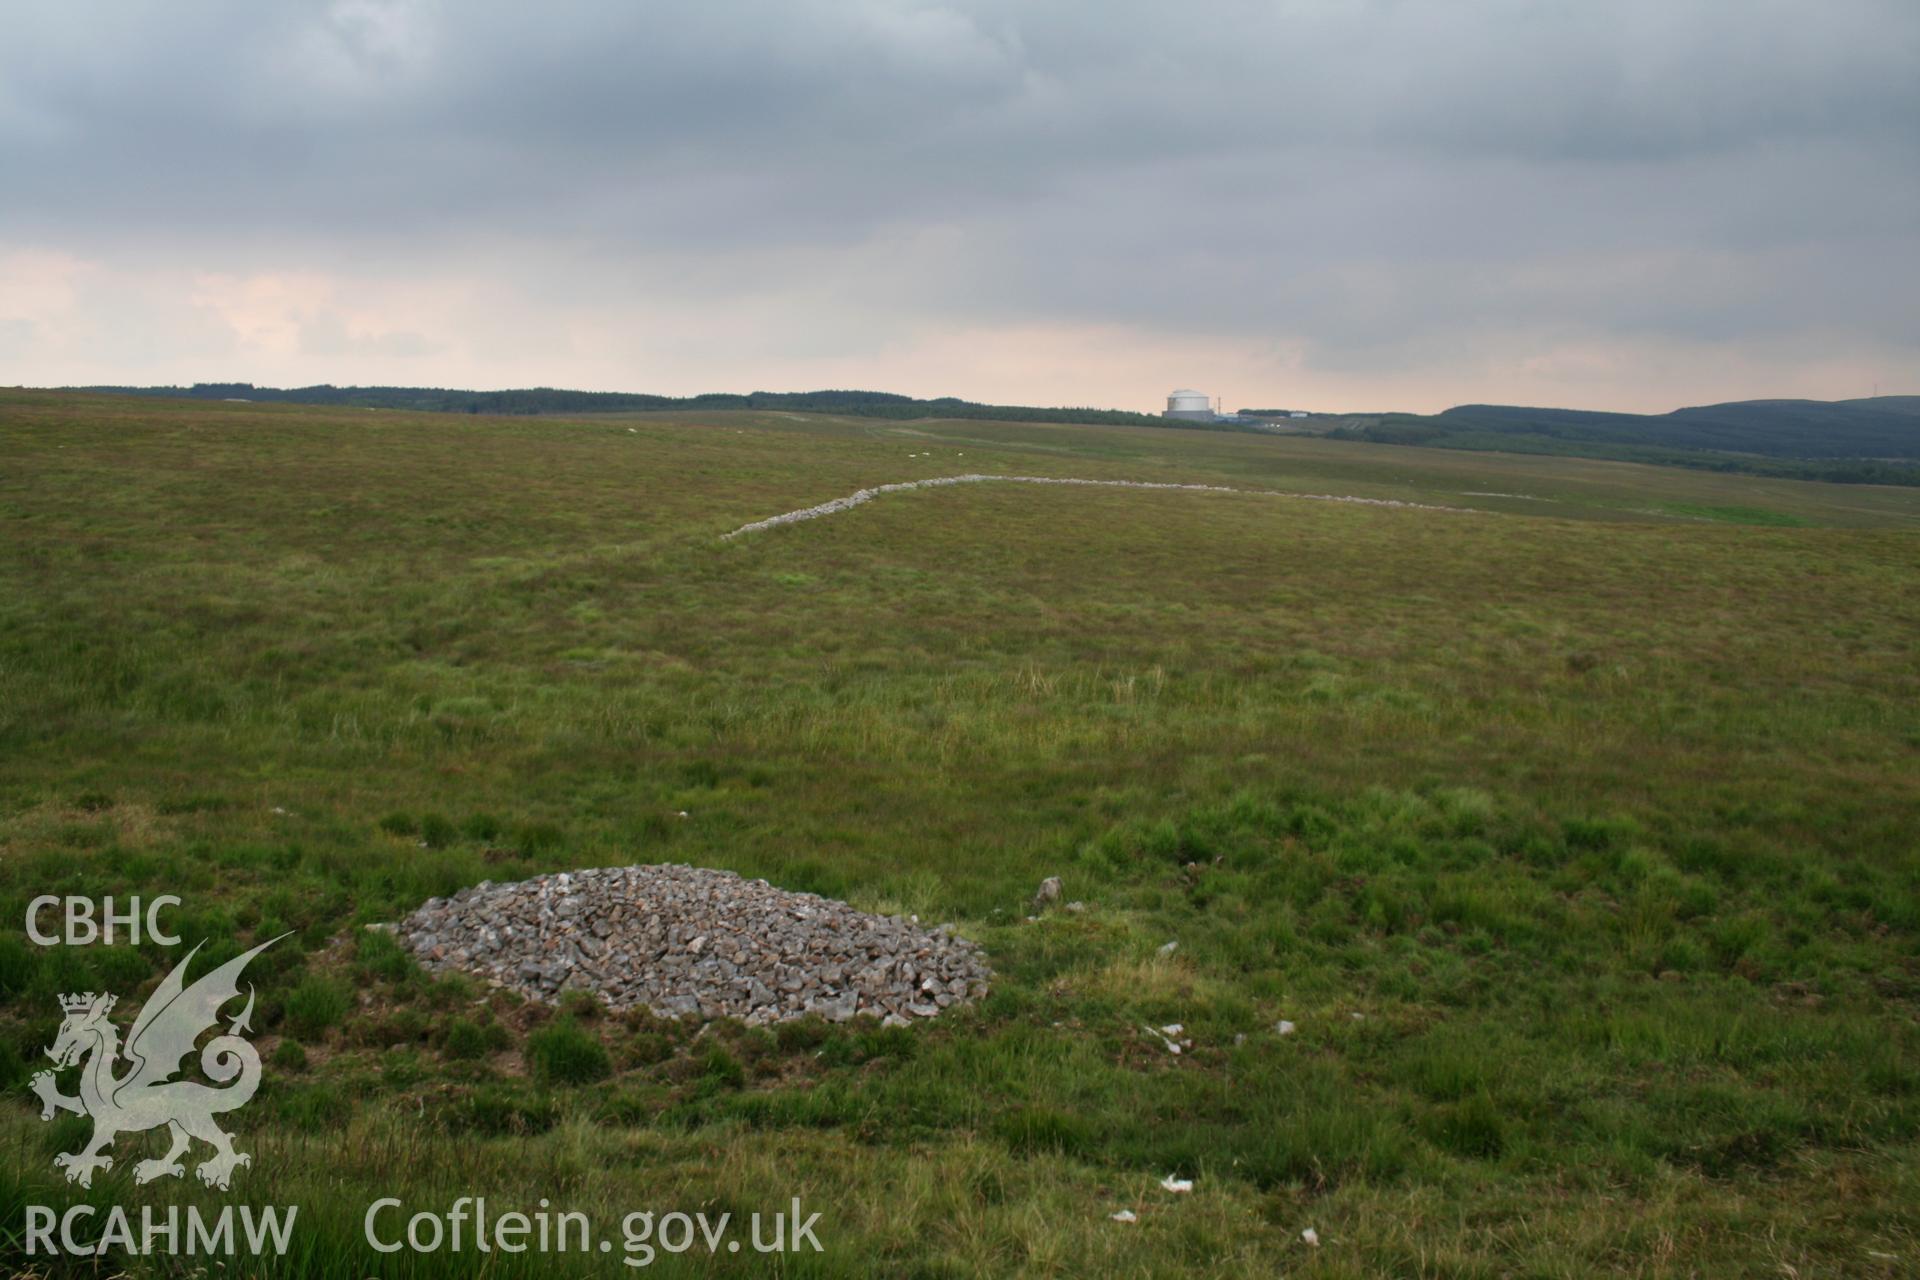 Clearance cairn within abandoned smallholding, looking east.